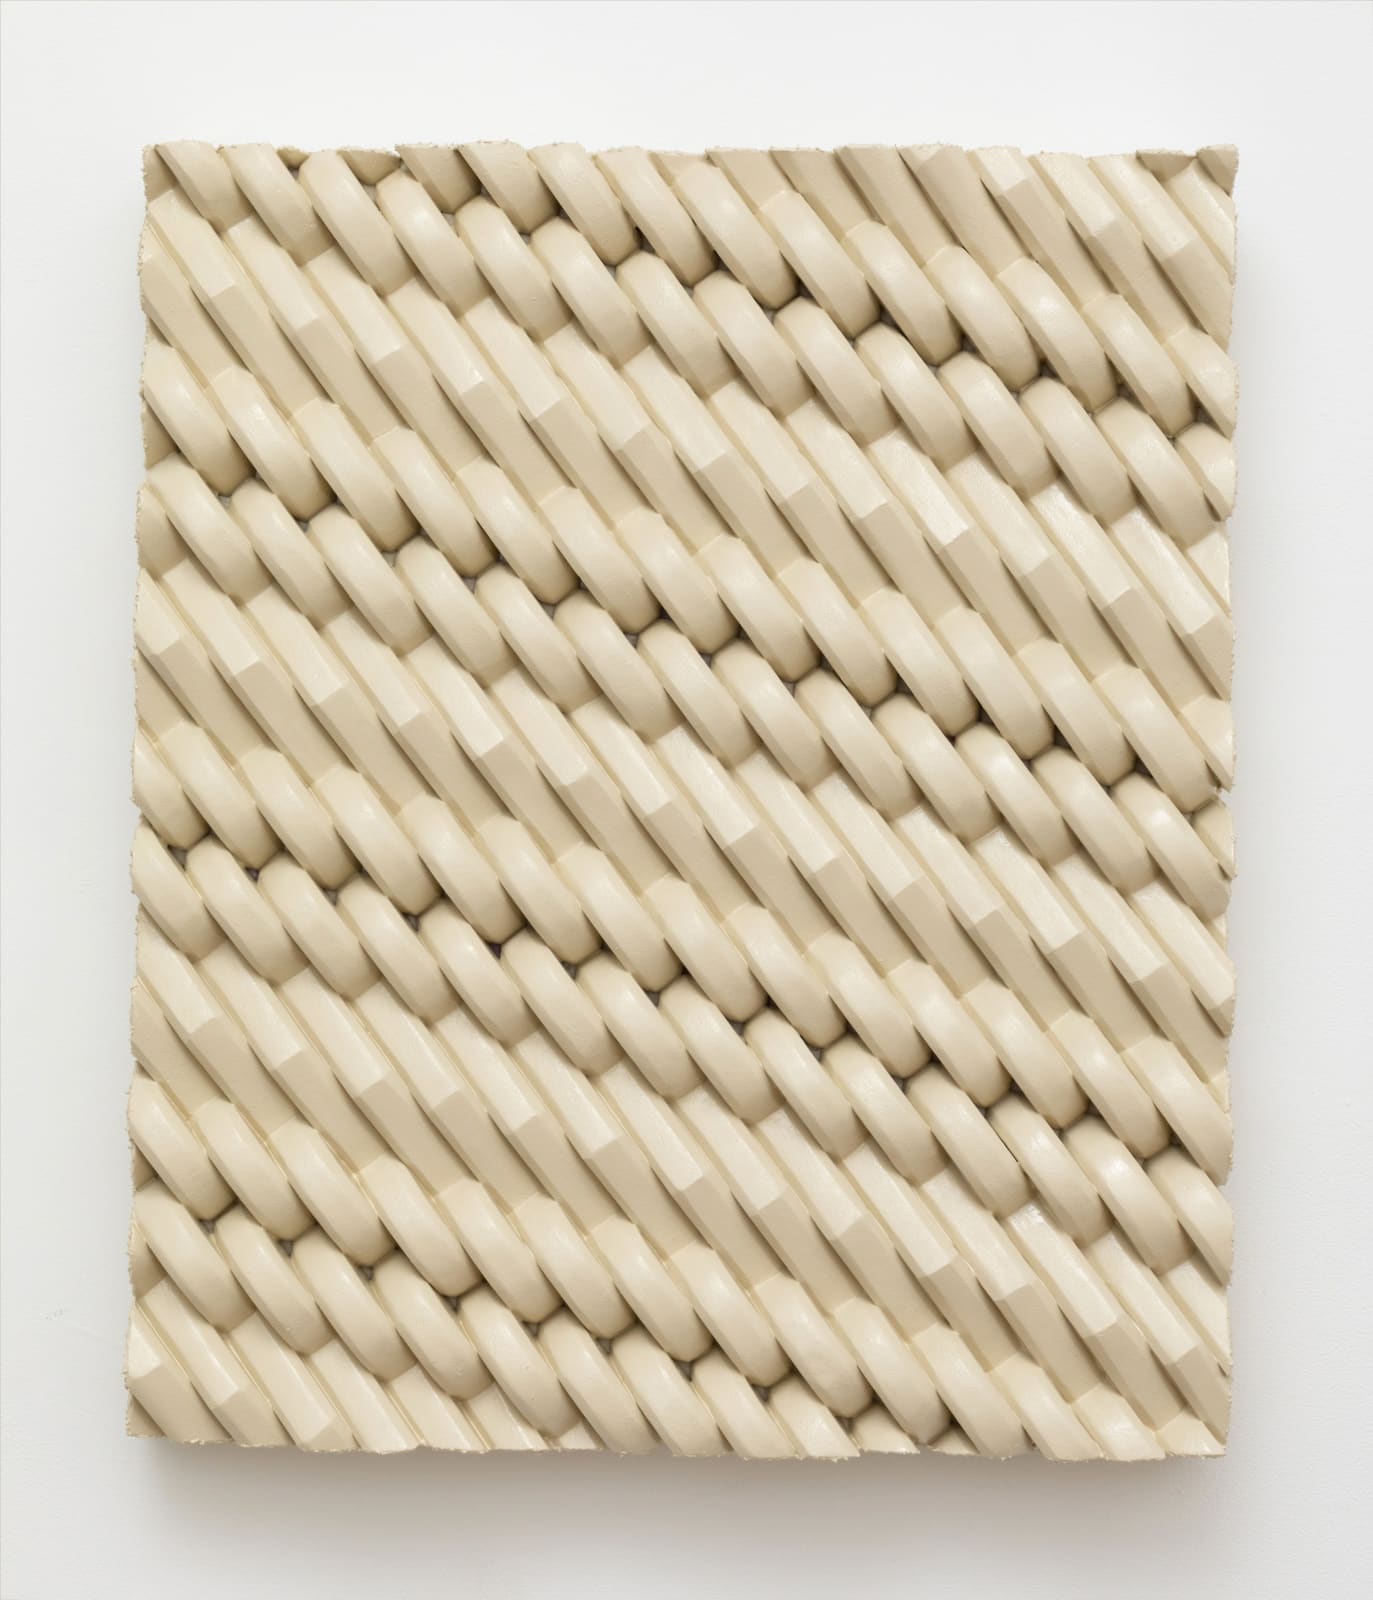 Wall-mounted sculpture consisting of carved polystyrene pieces aggregated together to form a cream hued, interlocking patterned rectangular panel. 